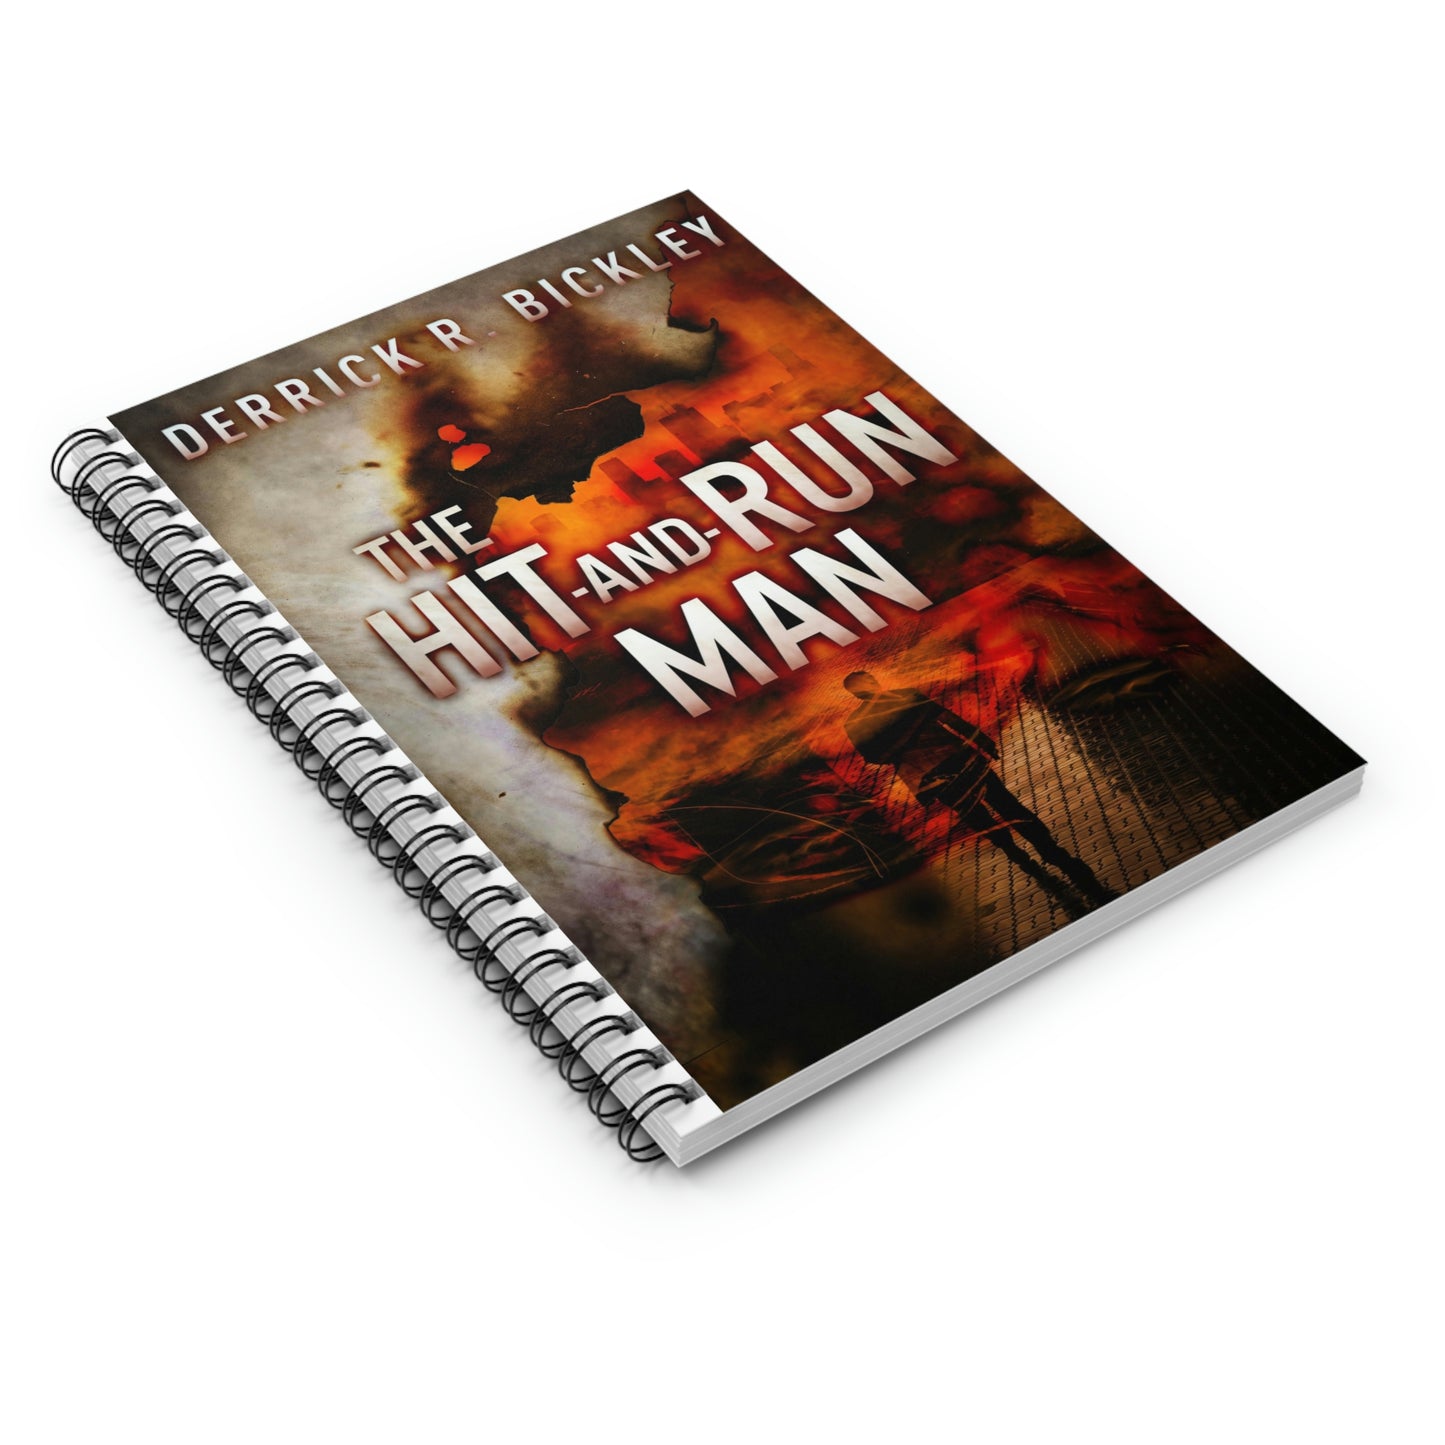 The Hit-and-Run Man - Spiral Notebook